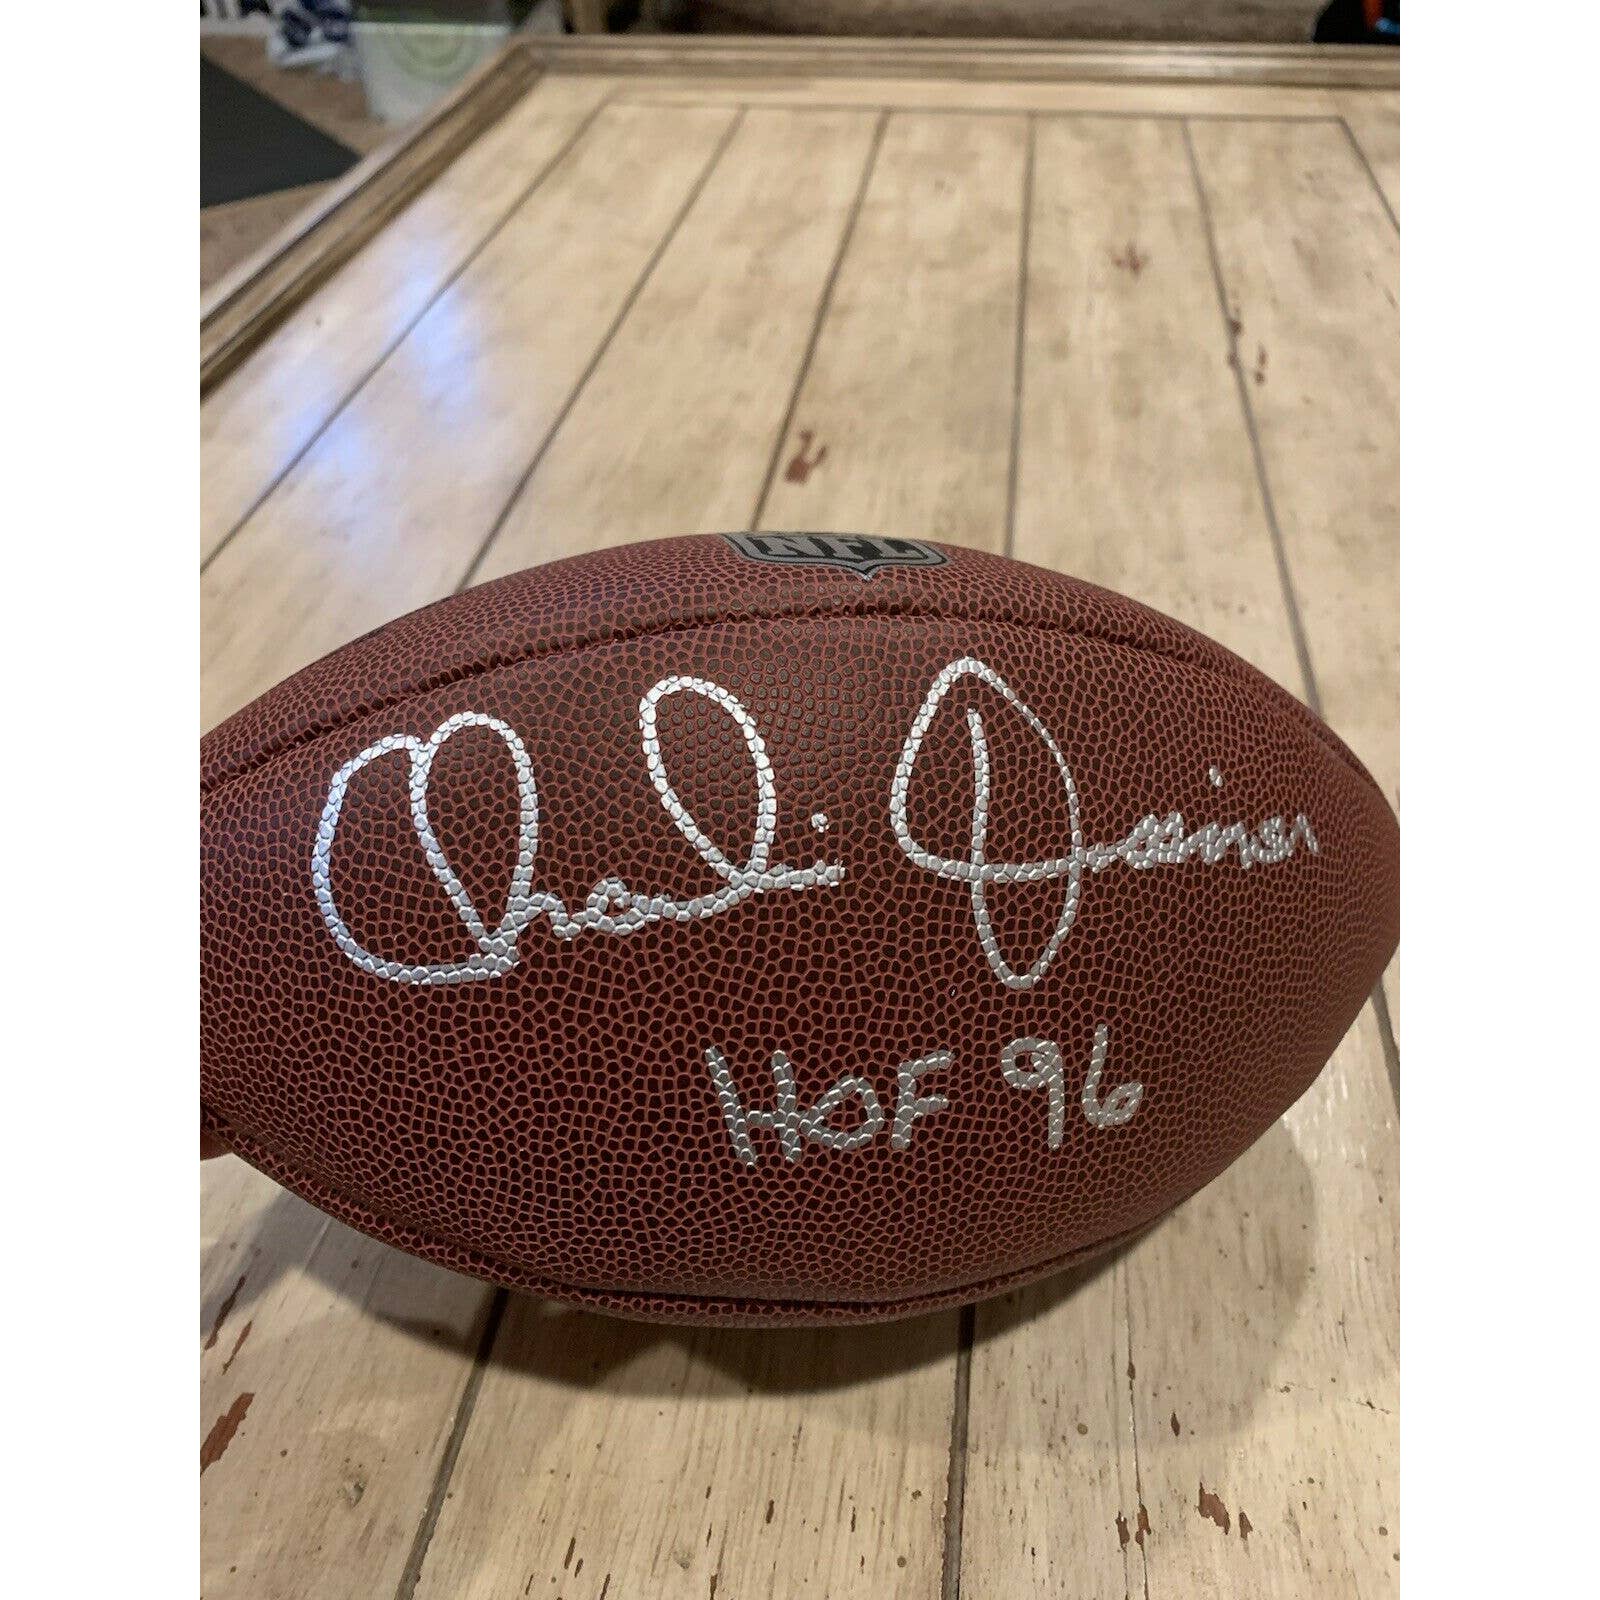 Charlie Joiner Autographed/Signed Football Schwartz COA San Diego Chargers - TreasuresEvolved